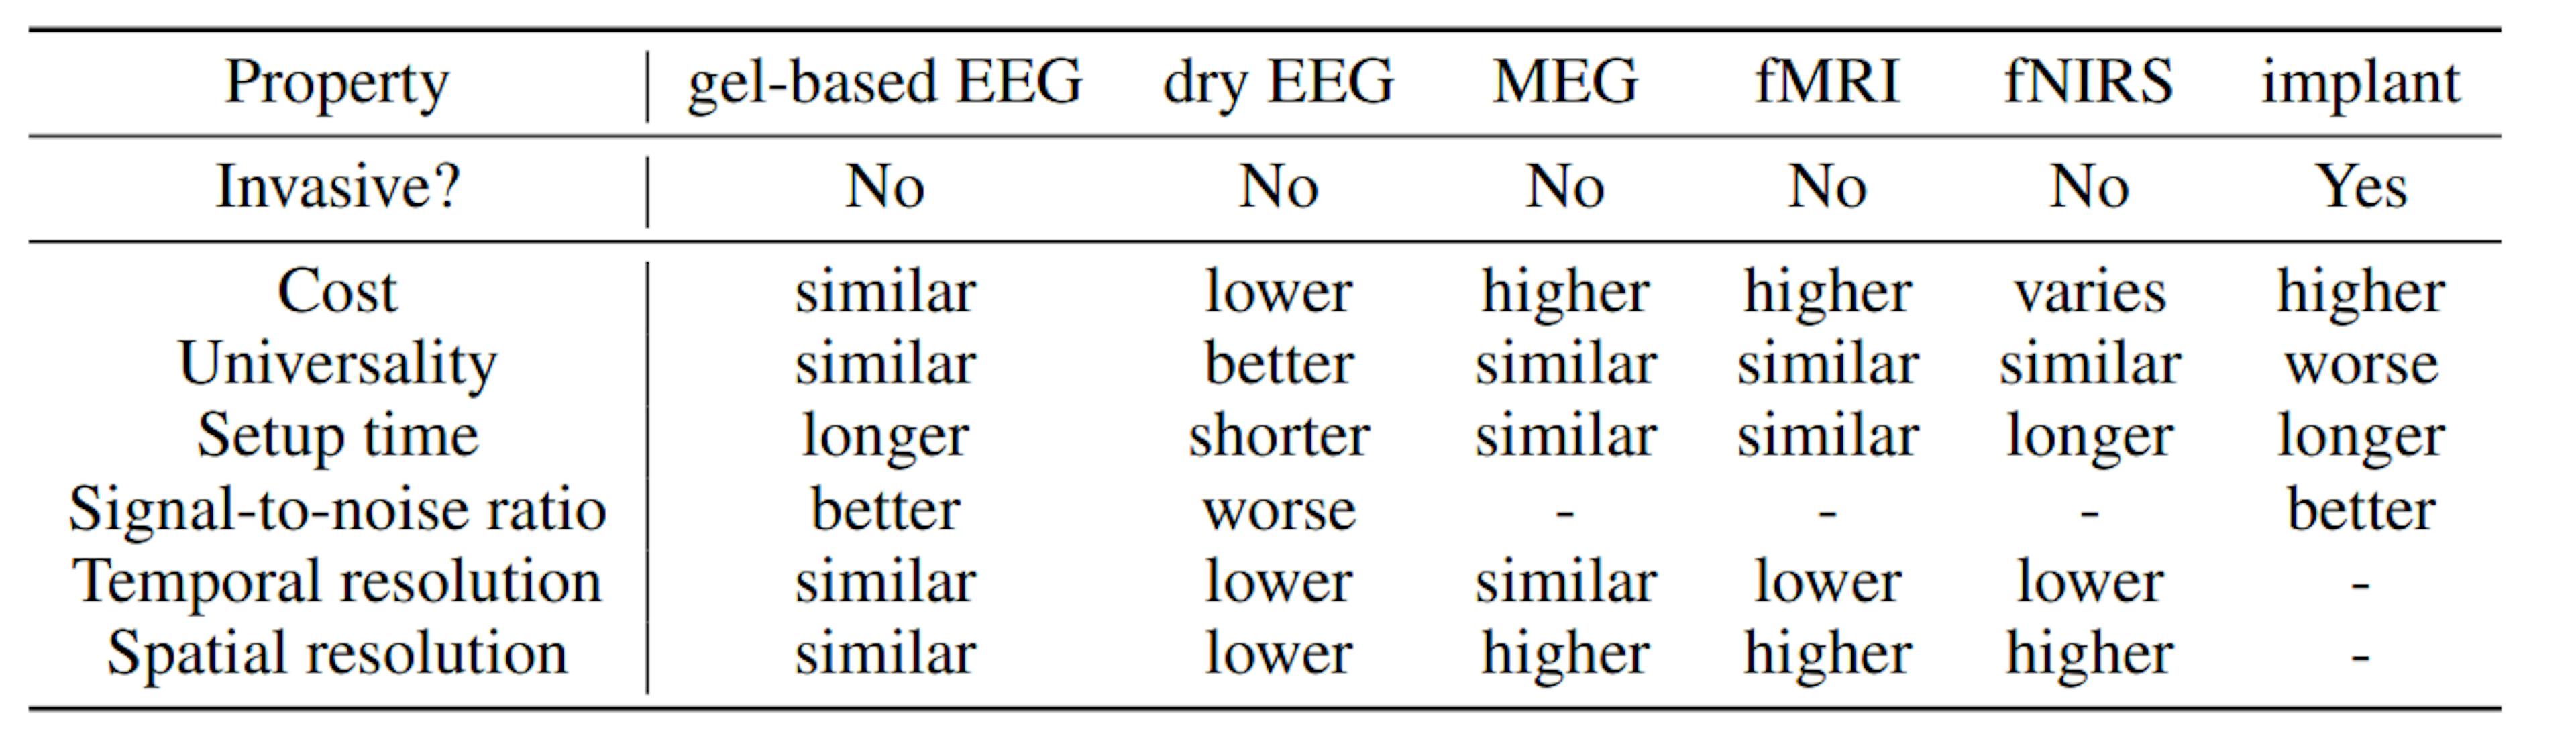 Table 5: A comparison between brain recording devices, using our saline-based EEG device as the baseline. Note that the comparison is based on the average products that are available on the market for research, and does not account for specialized or customized devices. Universality considers whether the device can be used by the general population. For signal-to-noise ratio, MEG, fMRI, and fNIRS record different types of neural signals which are not directly comparable to EEG. For implants, the temporal and spatial resolution largely depends on the particular type of implant device used.